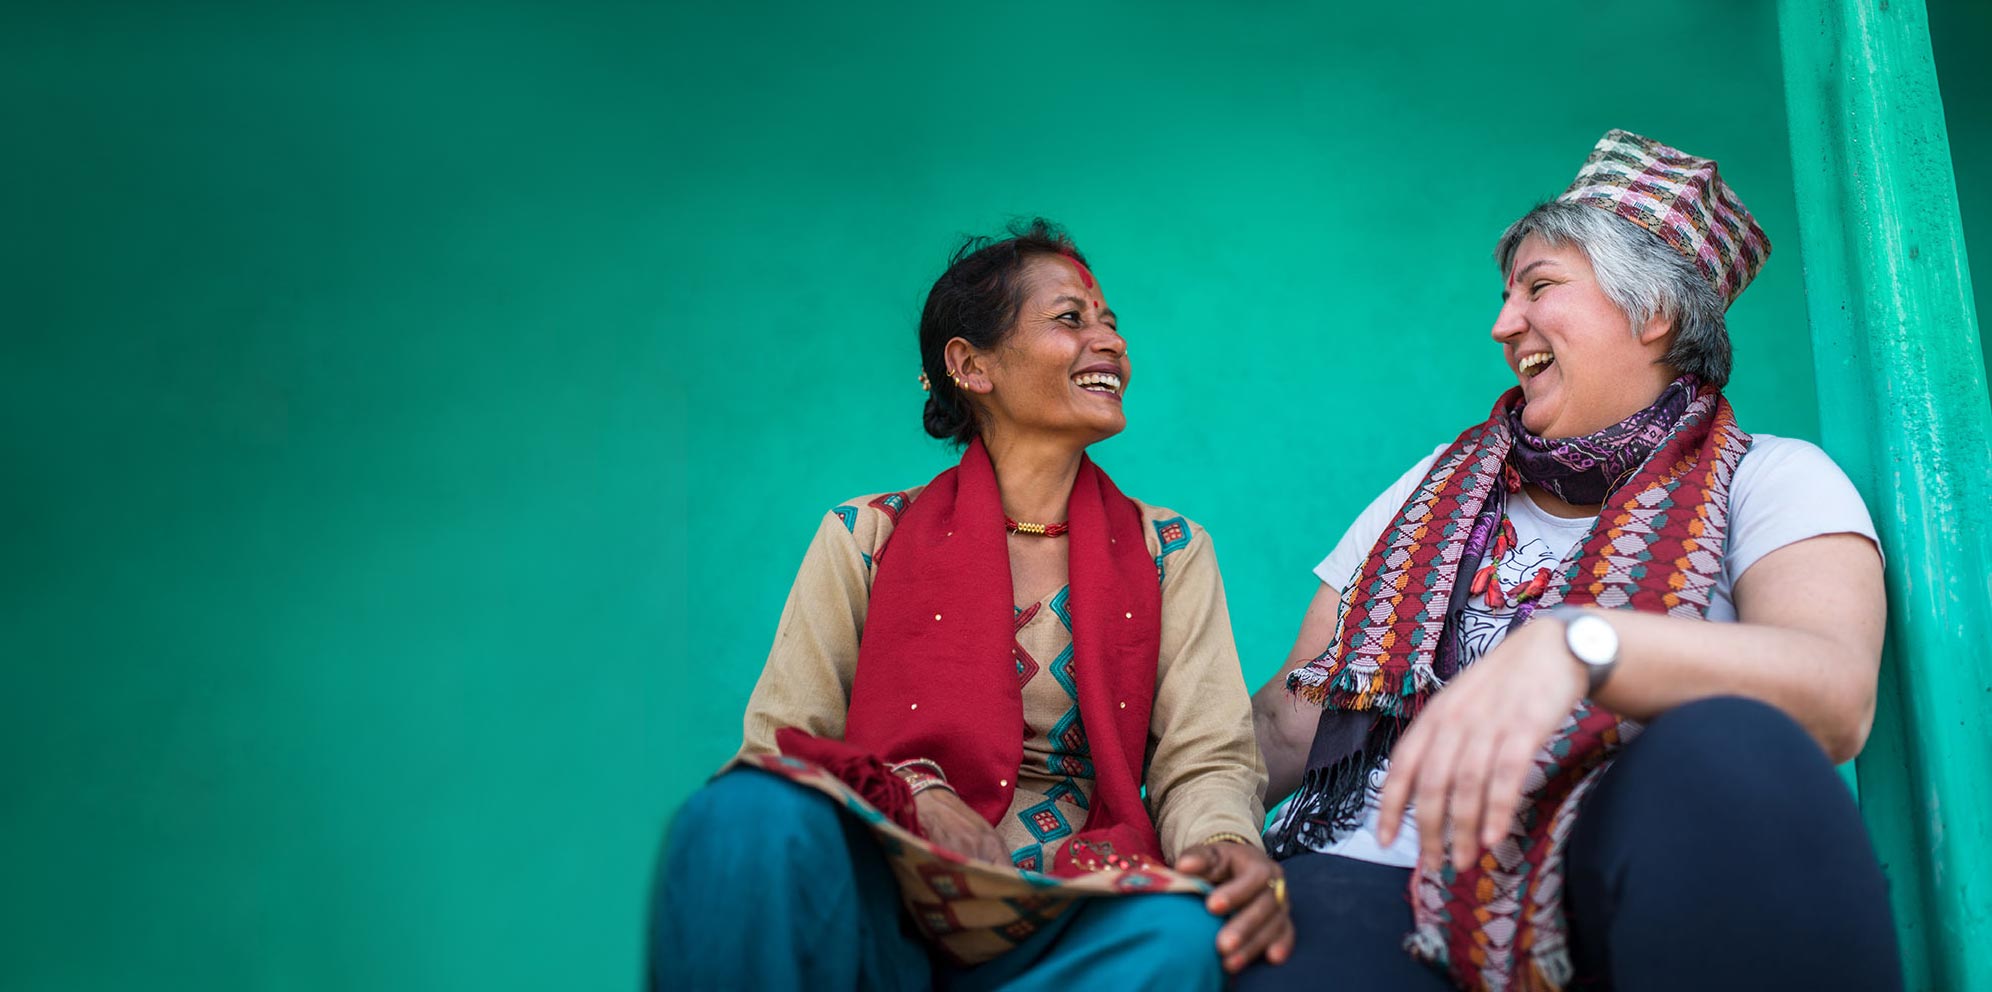 OXFAM See For Yourself donor Jacqui sits with Sushila, Nepal, where OXFAM has provided water sources to over 200 households affected by the 2015 earthquake. Photo: Aurélie Marrier d'Unienville/Oxfam